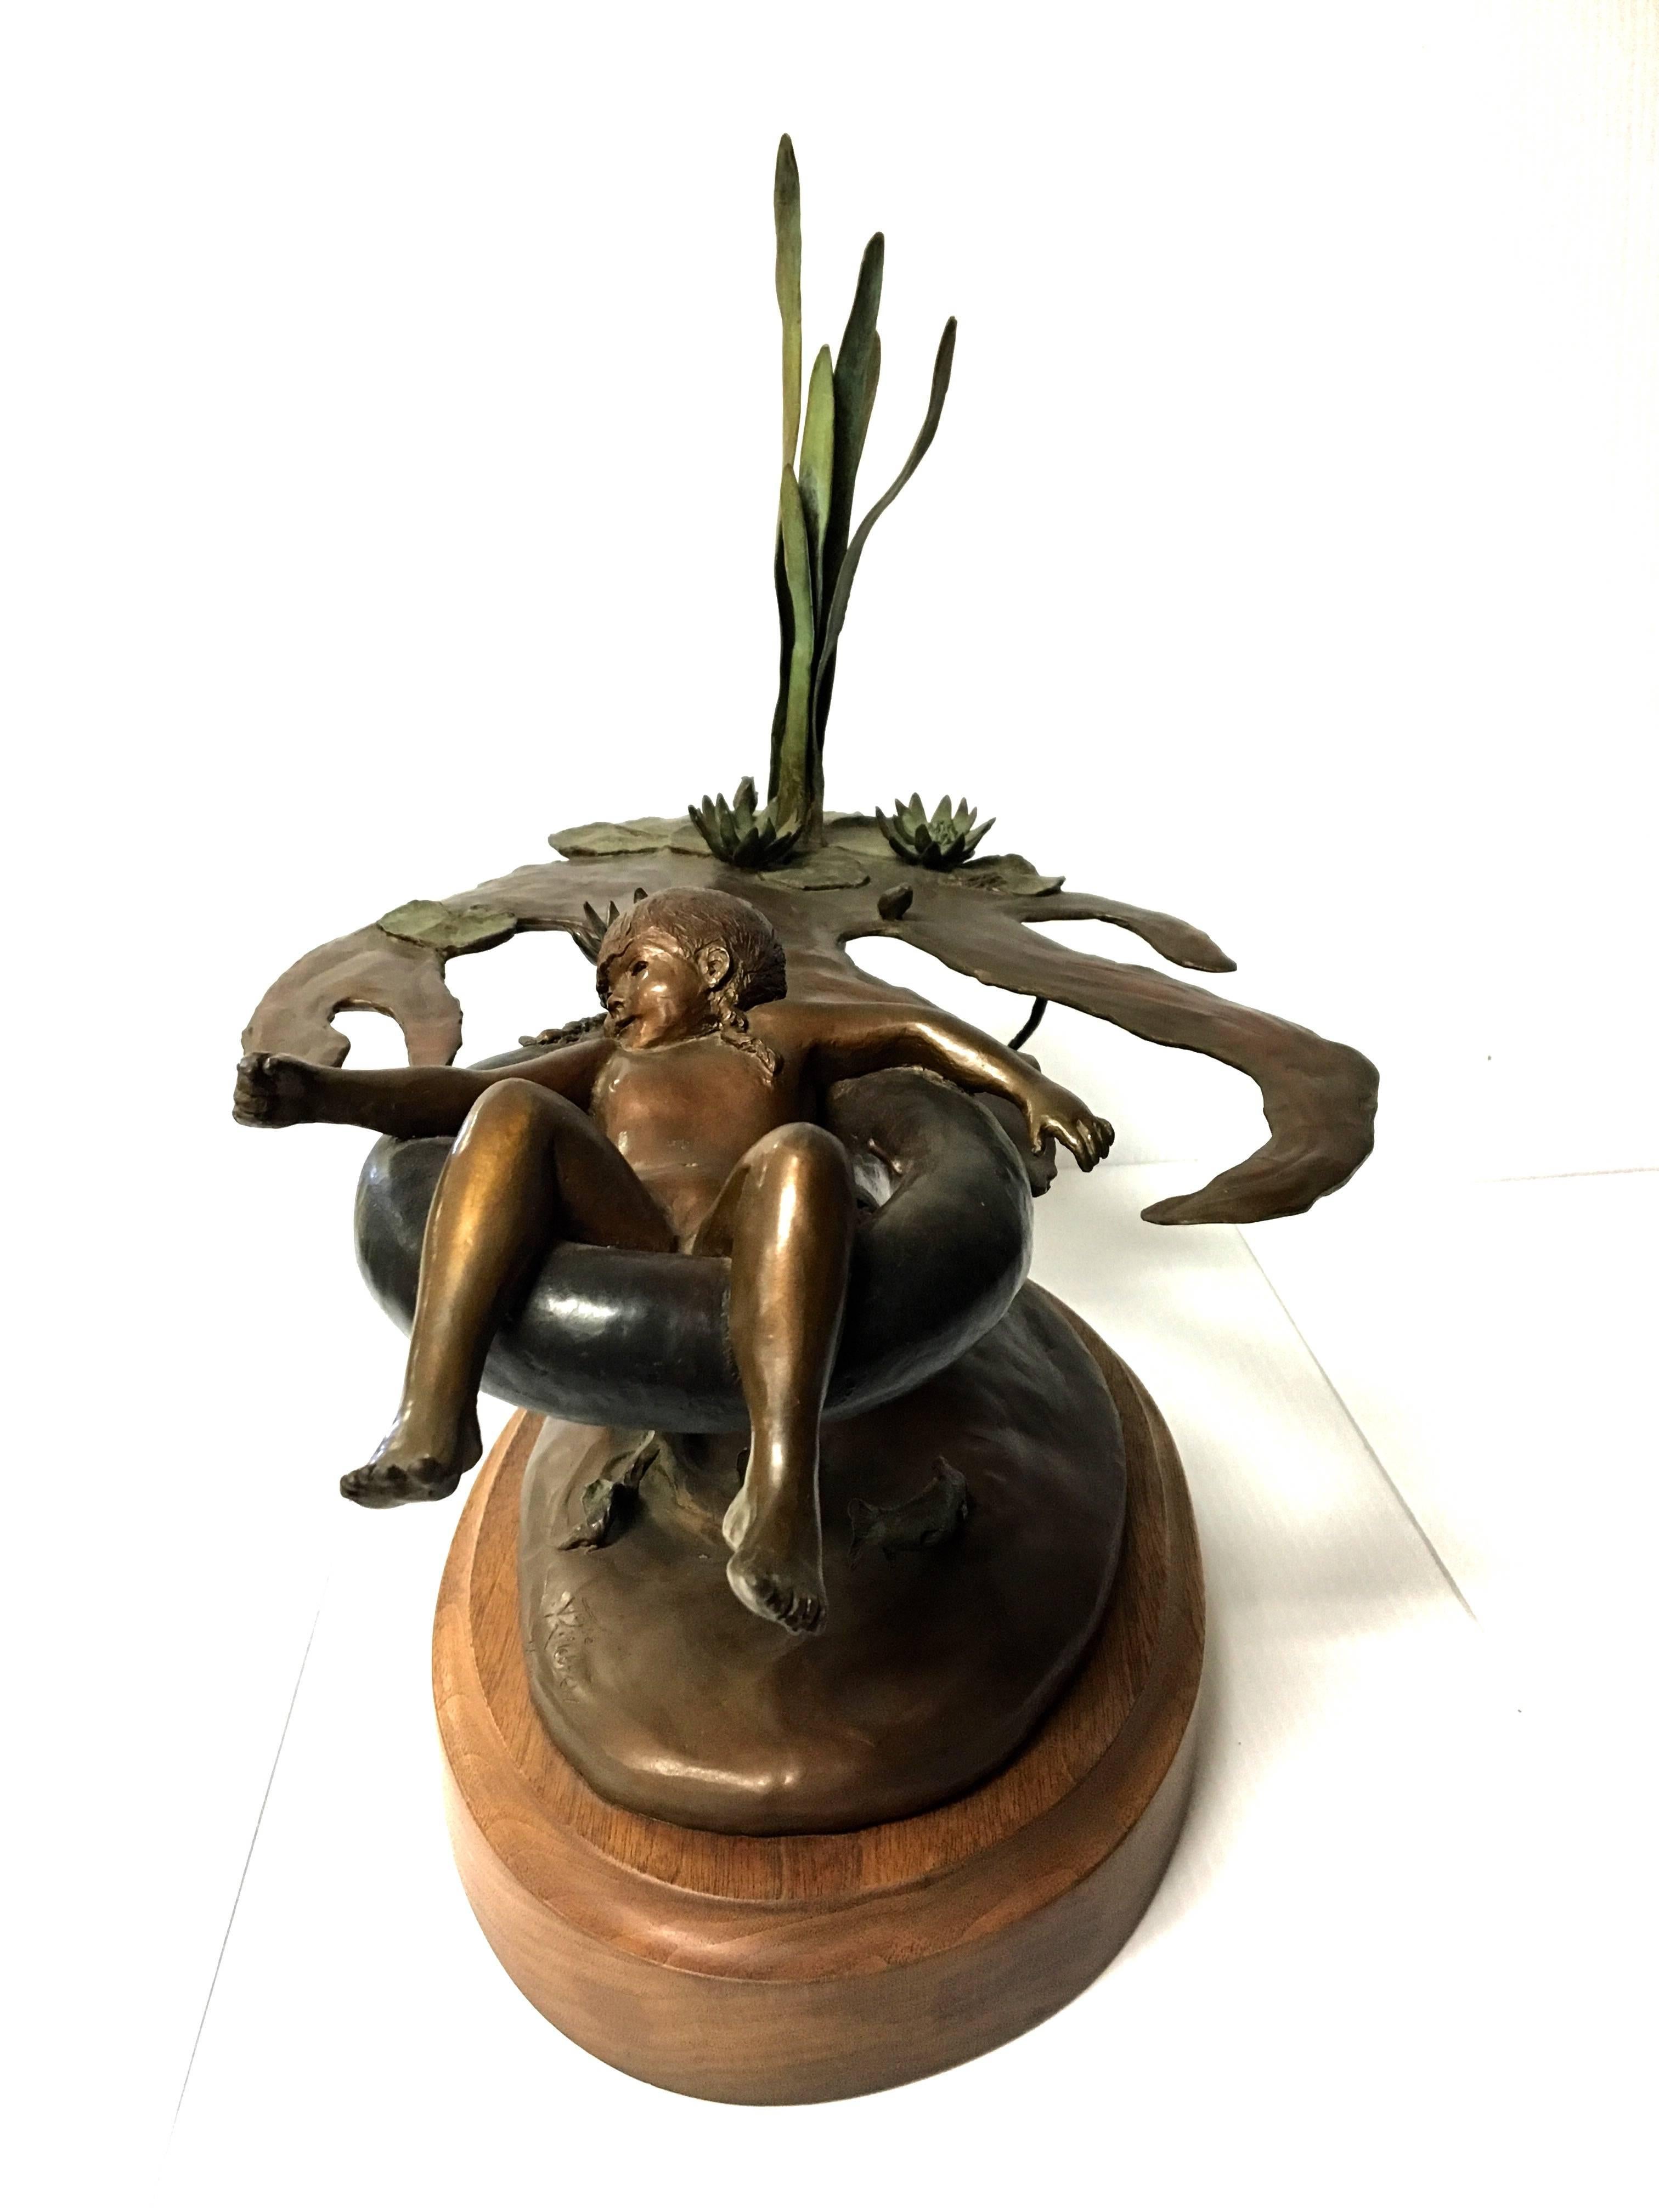 American Whimsical Bronze Sculpture by Joyce Killebrew Signed and Numbered